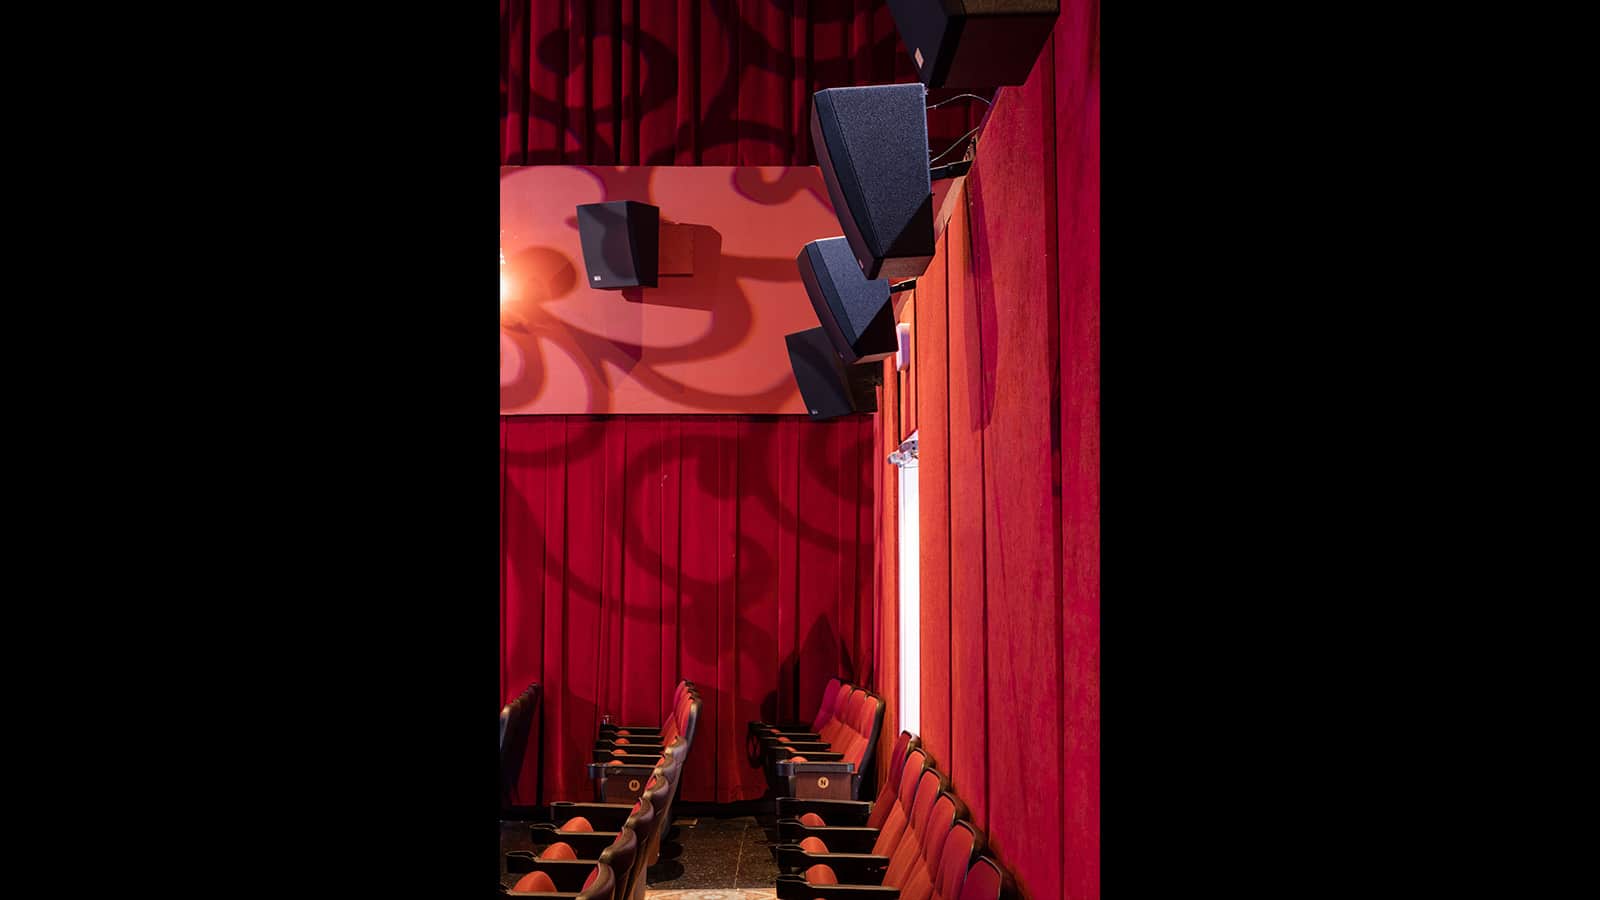 Meyer Sound and Dolby Atmos Expand the Aural Experience at One-of-a-Kind New Orleans Theater